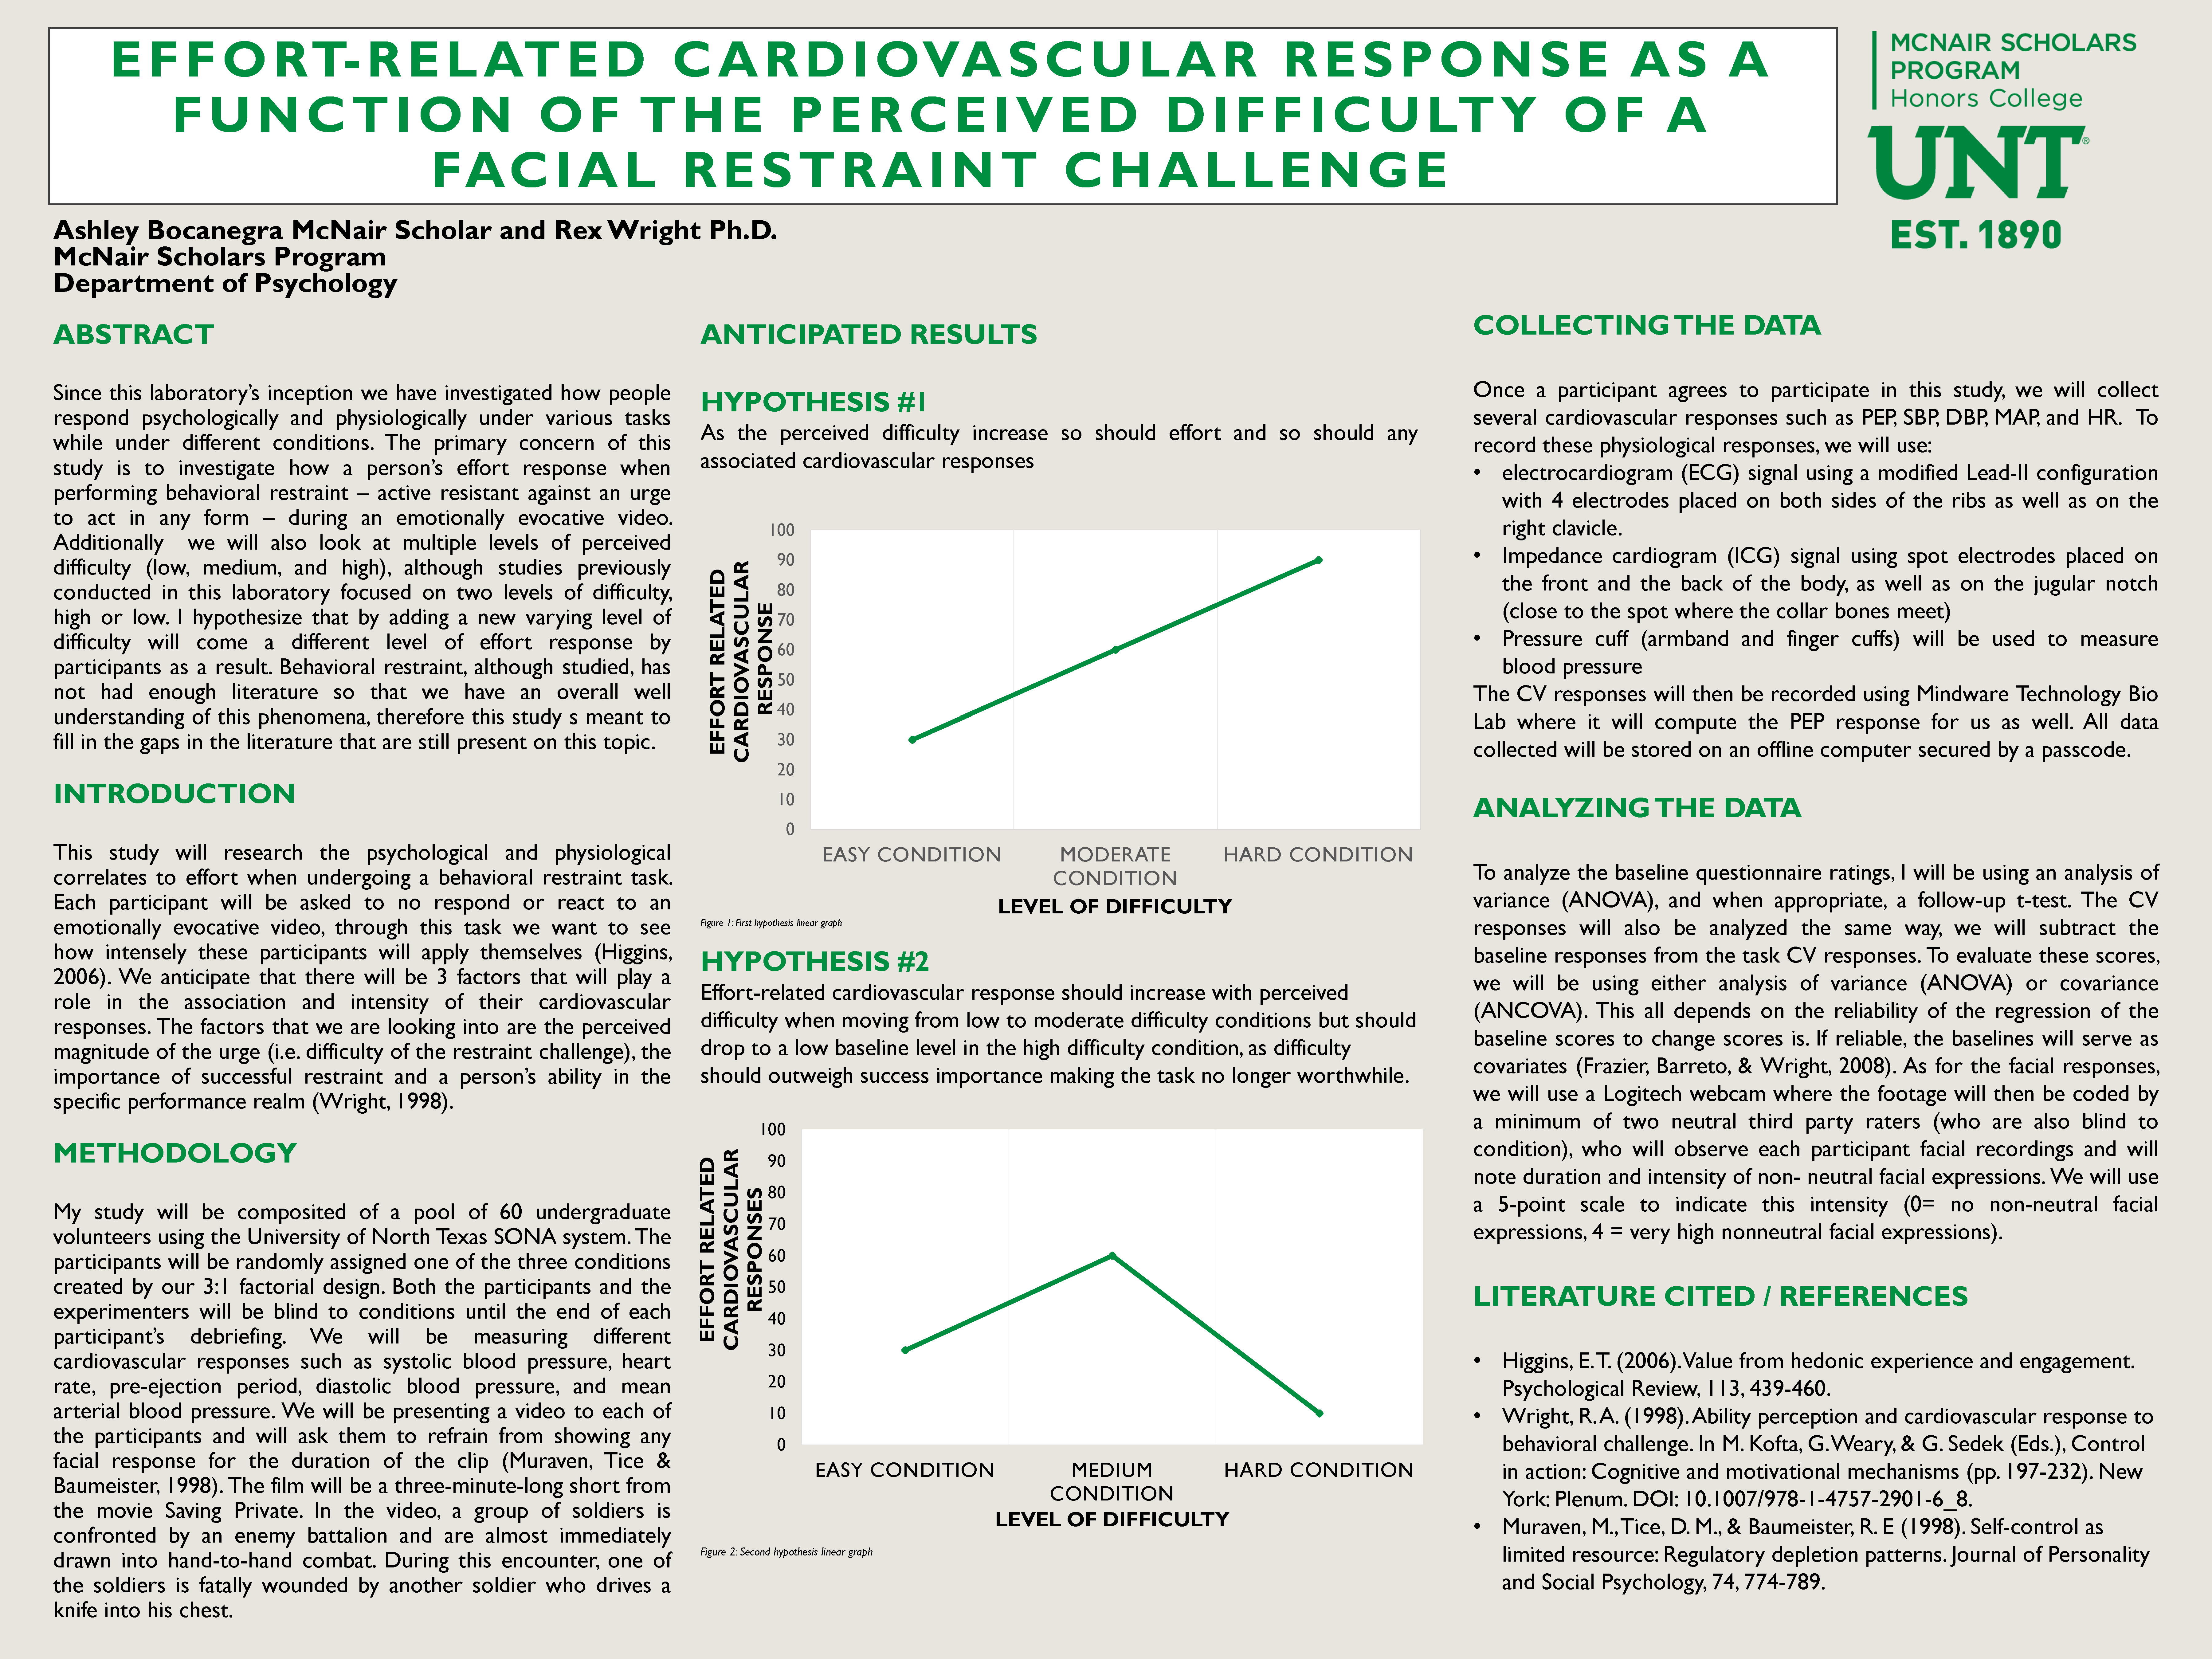 Effort-Related Cardiovascular Response as a Function of the Perceived Difficulty of a Facial Restrai